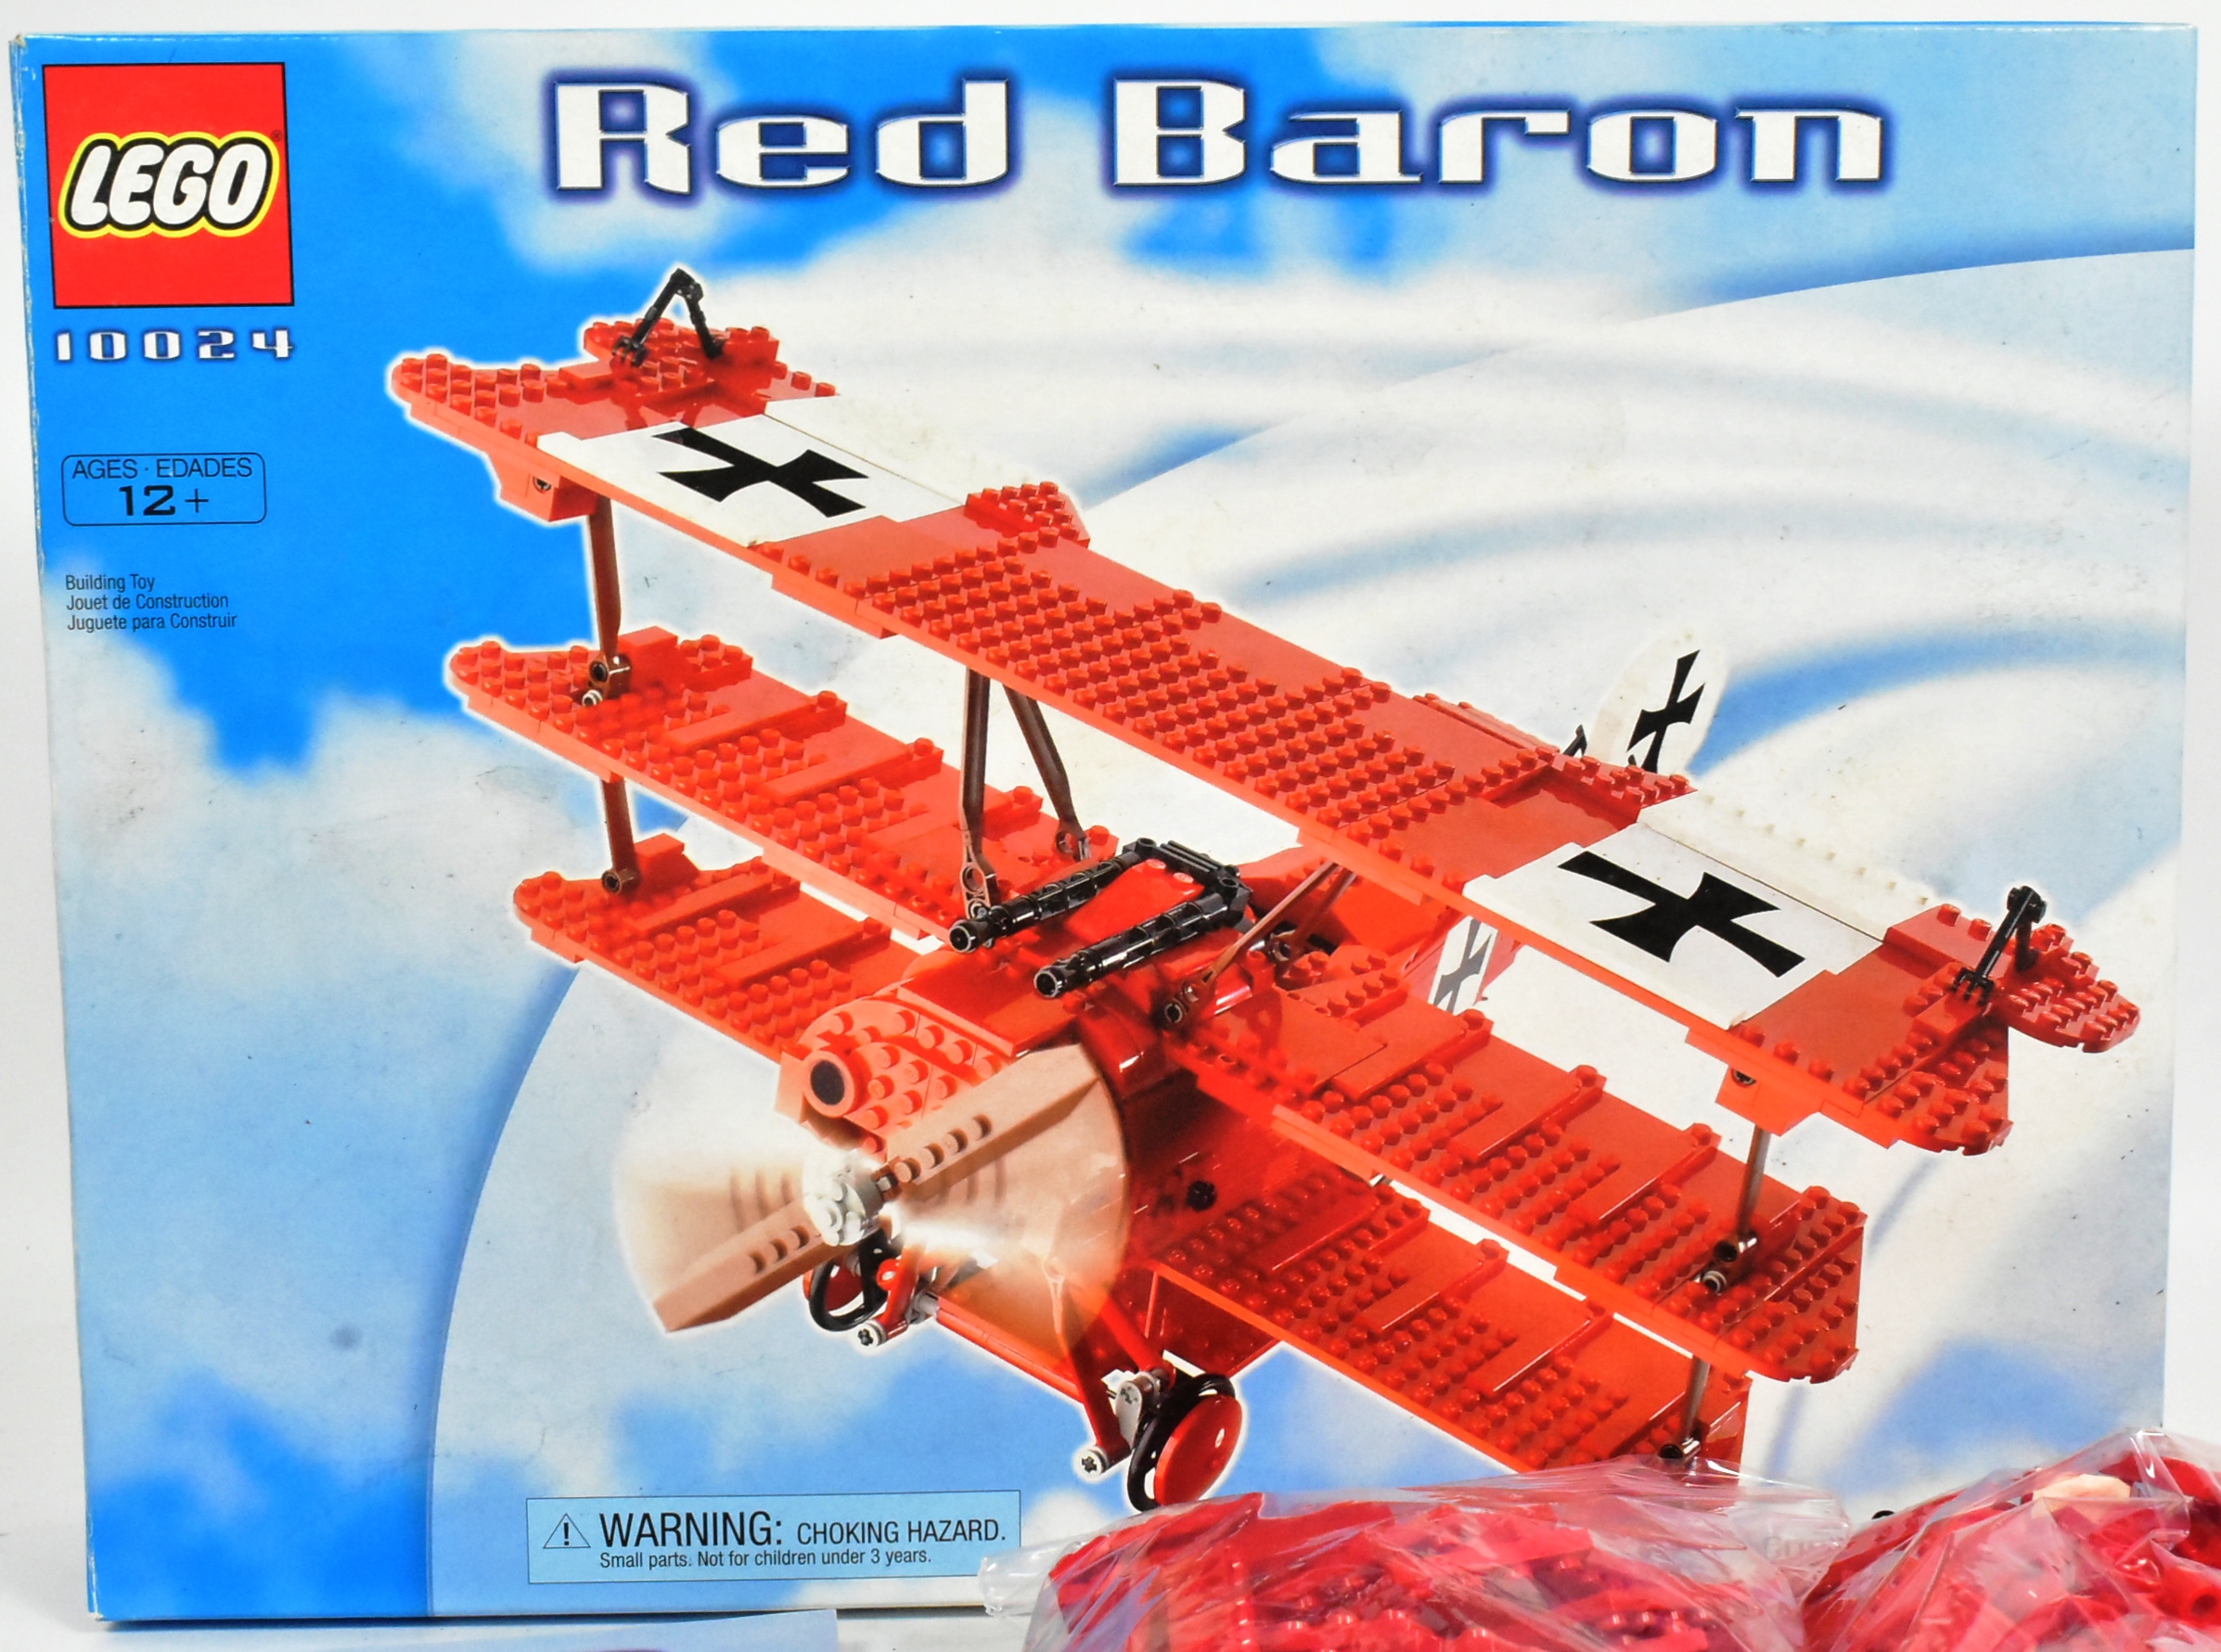 LEGO - SCULPTURES - 10024 - RED BARON - Image 2 of 5